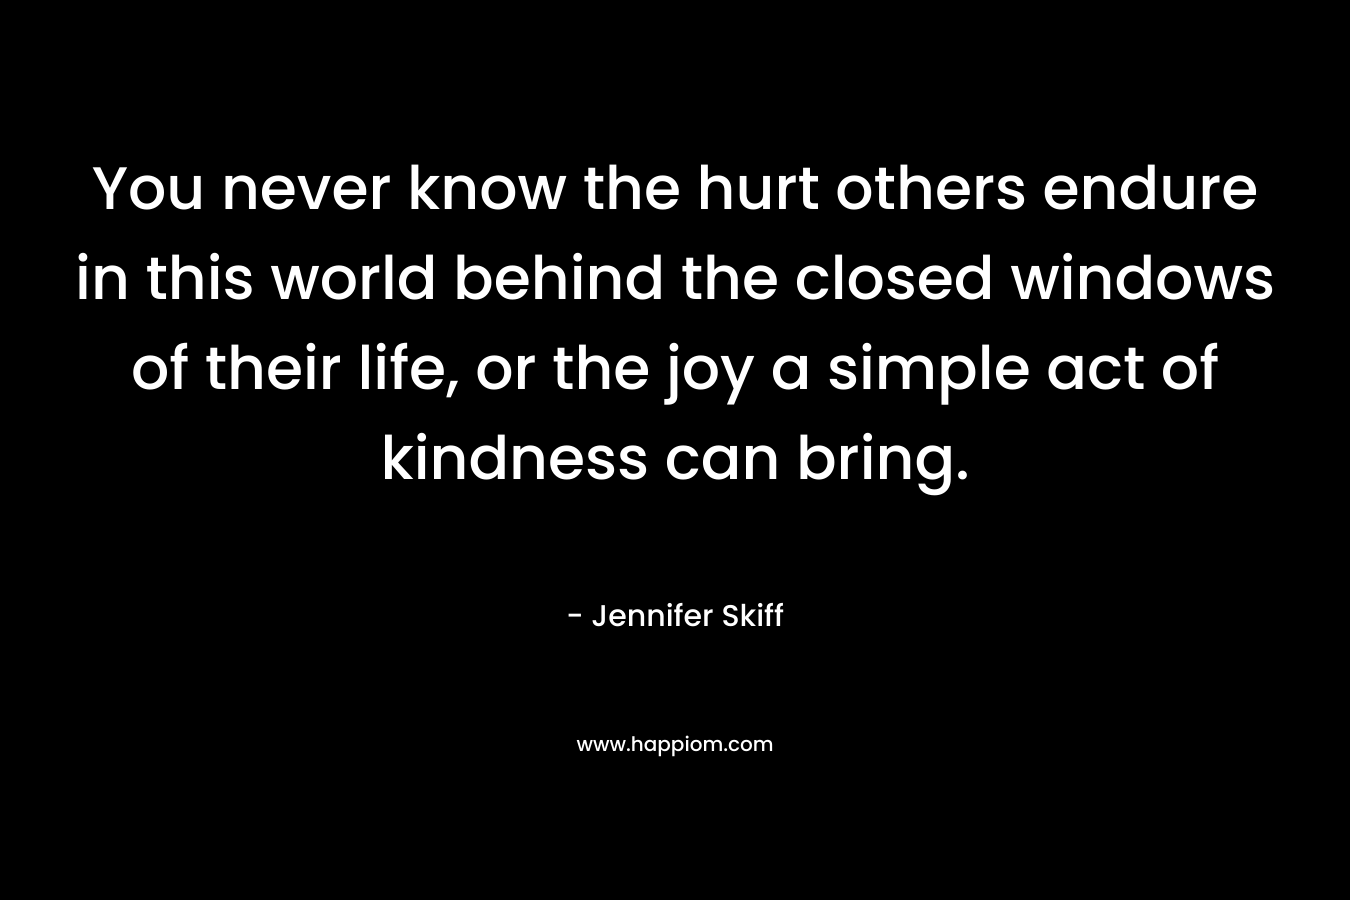 You never know the hurt others endure in this world behind the closed windows of their life, or the joy a simple act of kindness can bring. – Jennifer Skiff